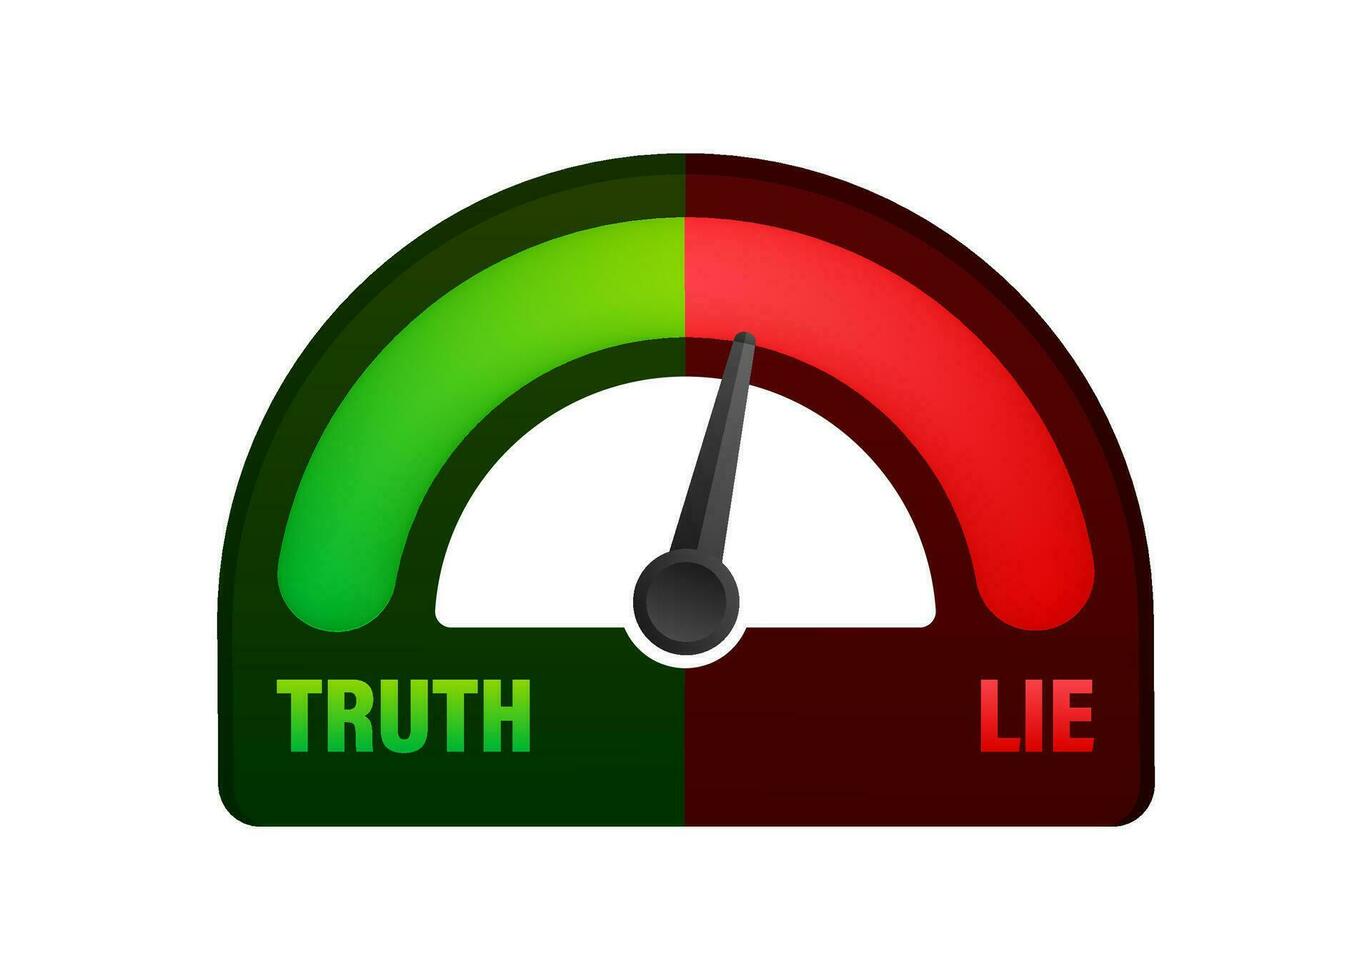 Truth and lie indicator for concept design. Vector illustration